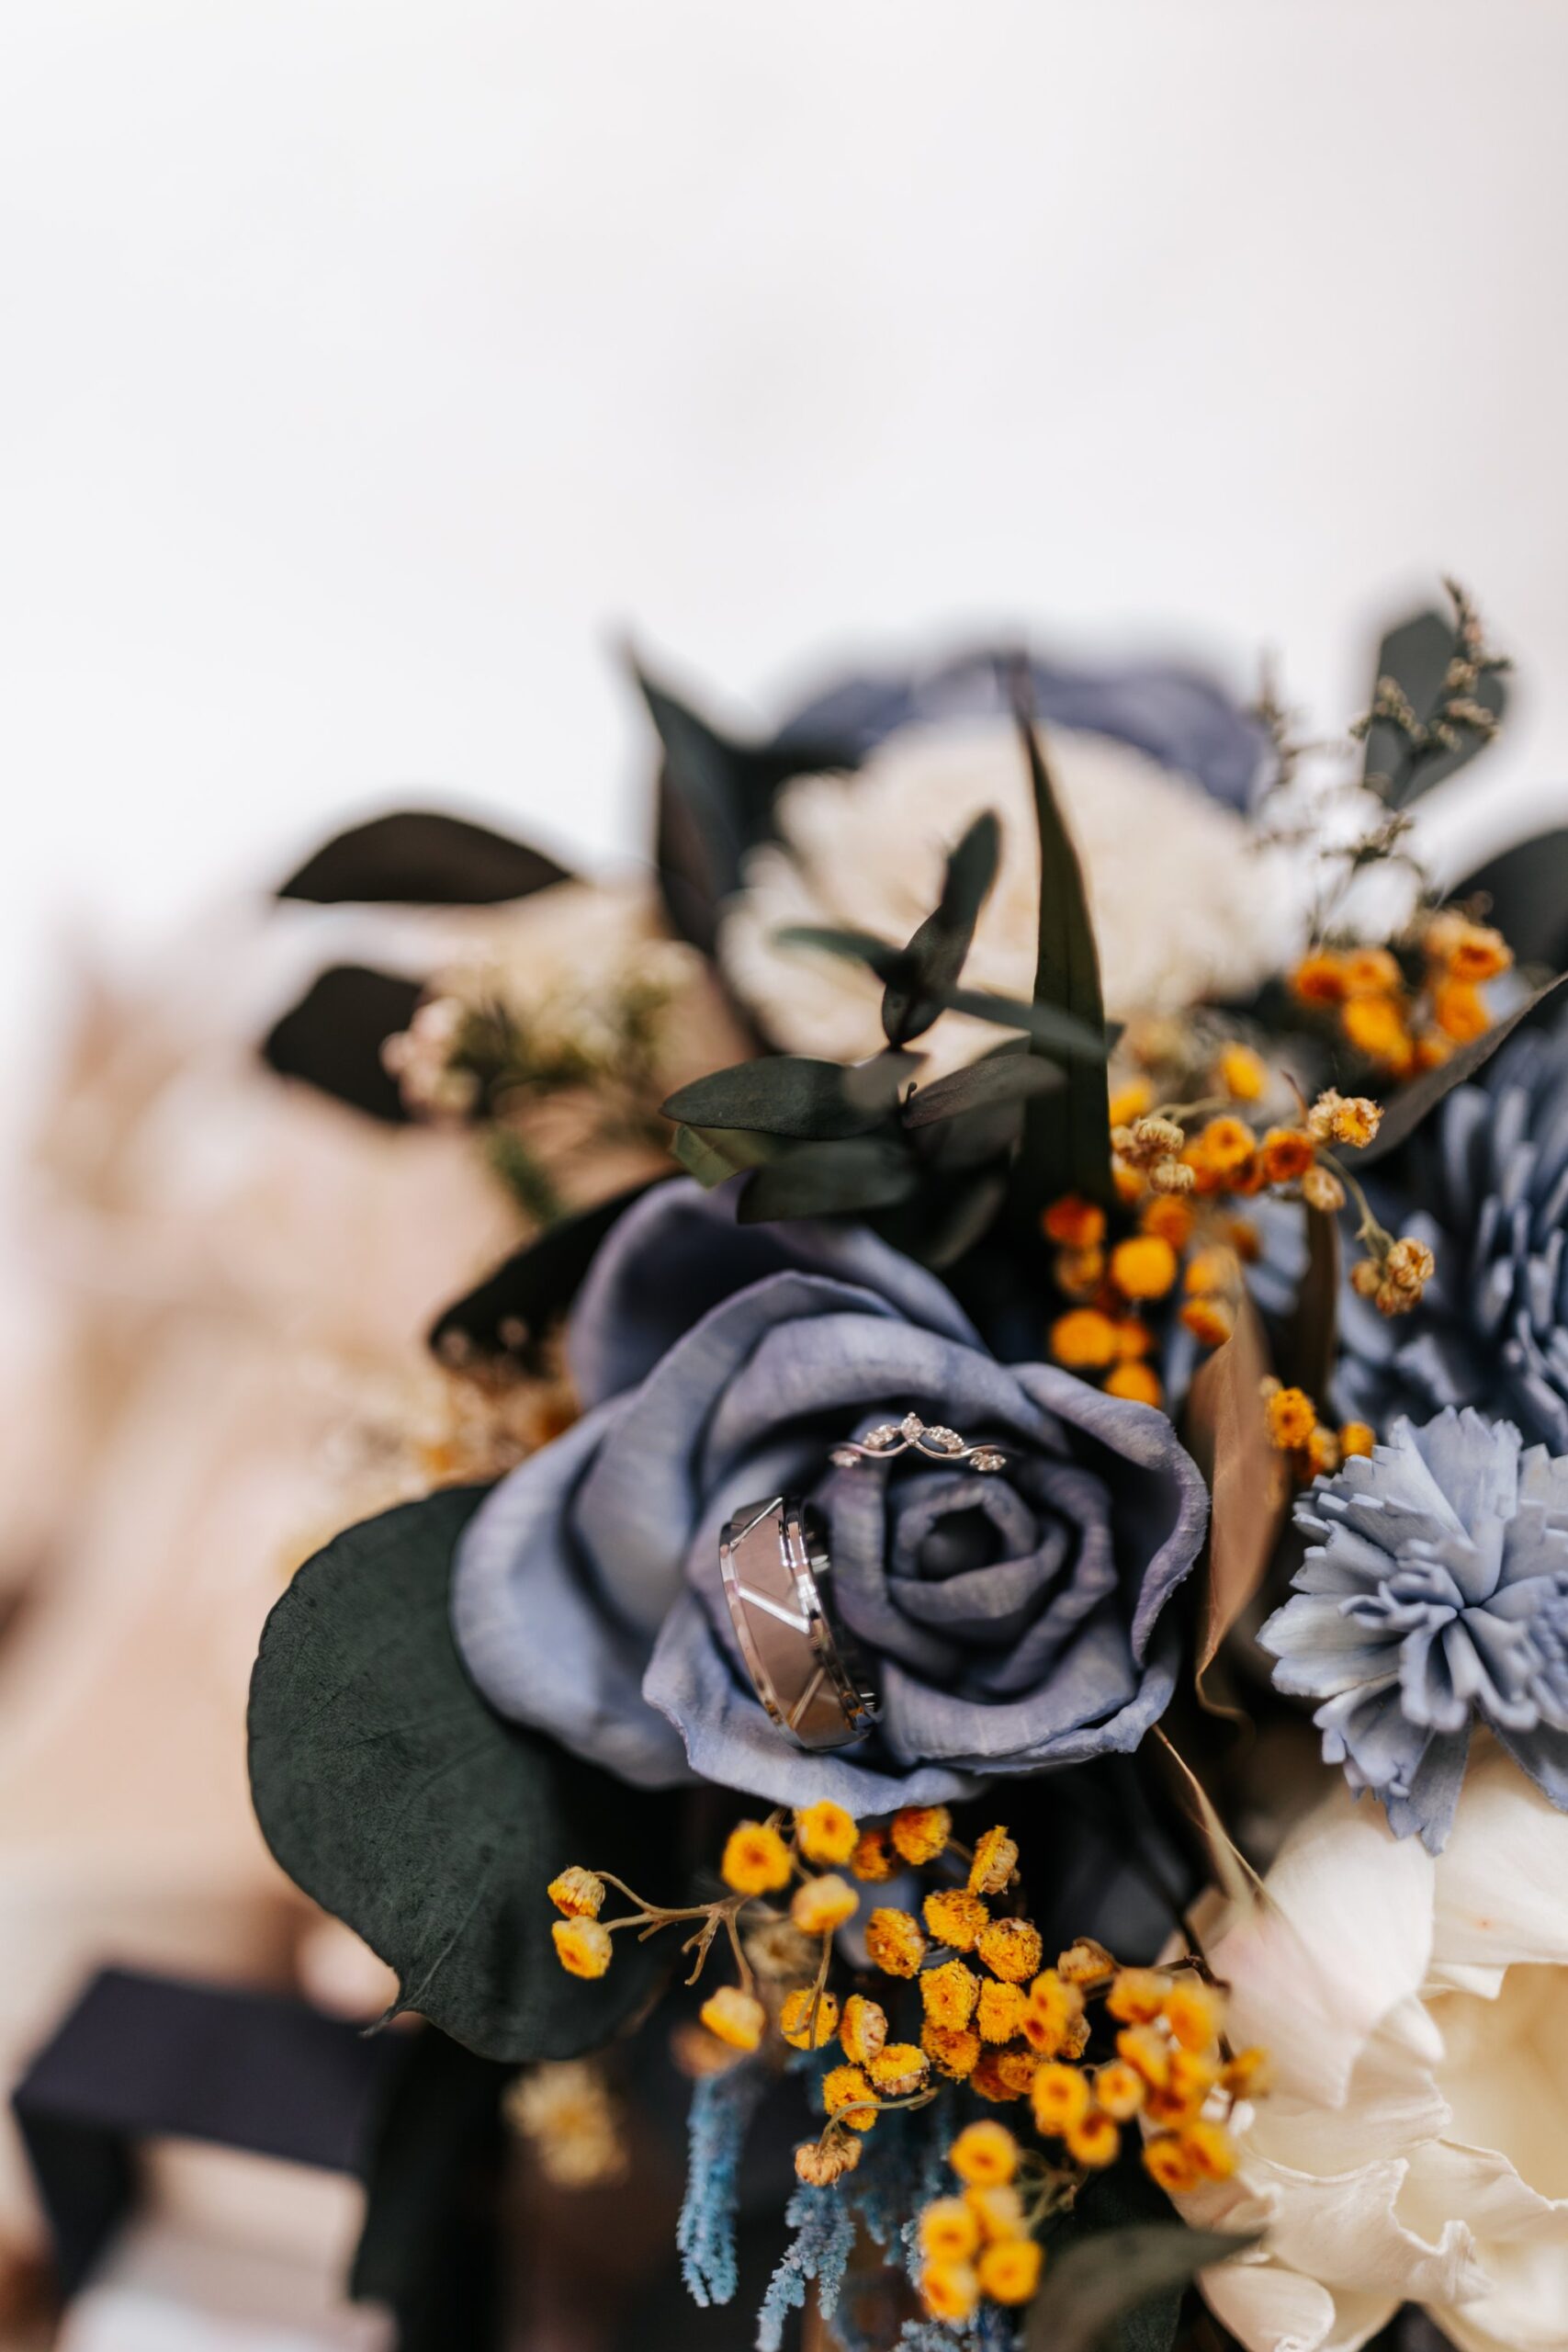 Overview of a sola wood bouquet made with blue, navy, and orange sola wood flowers.